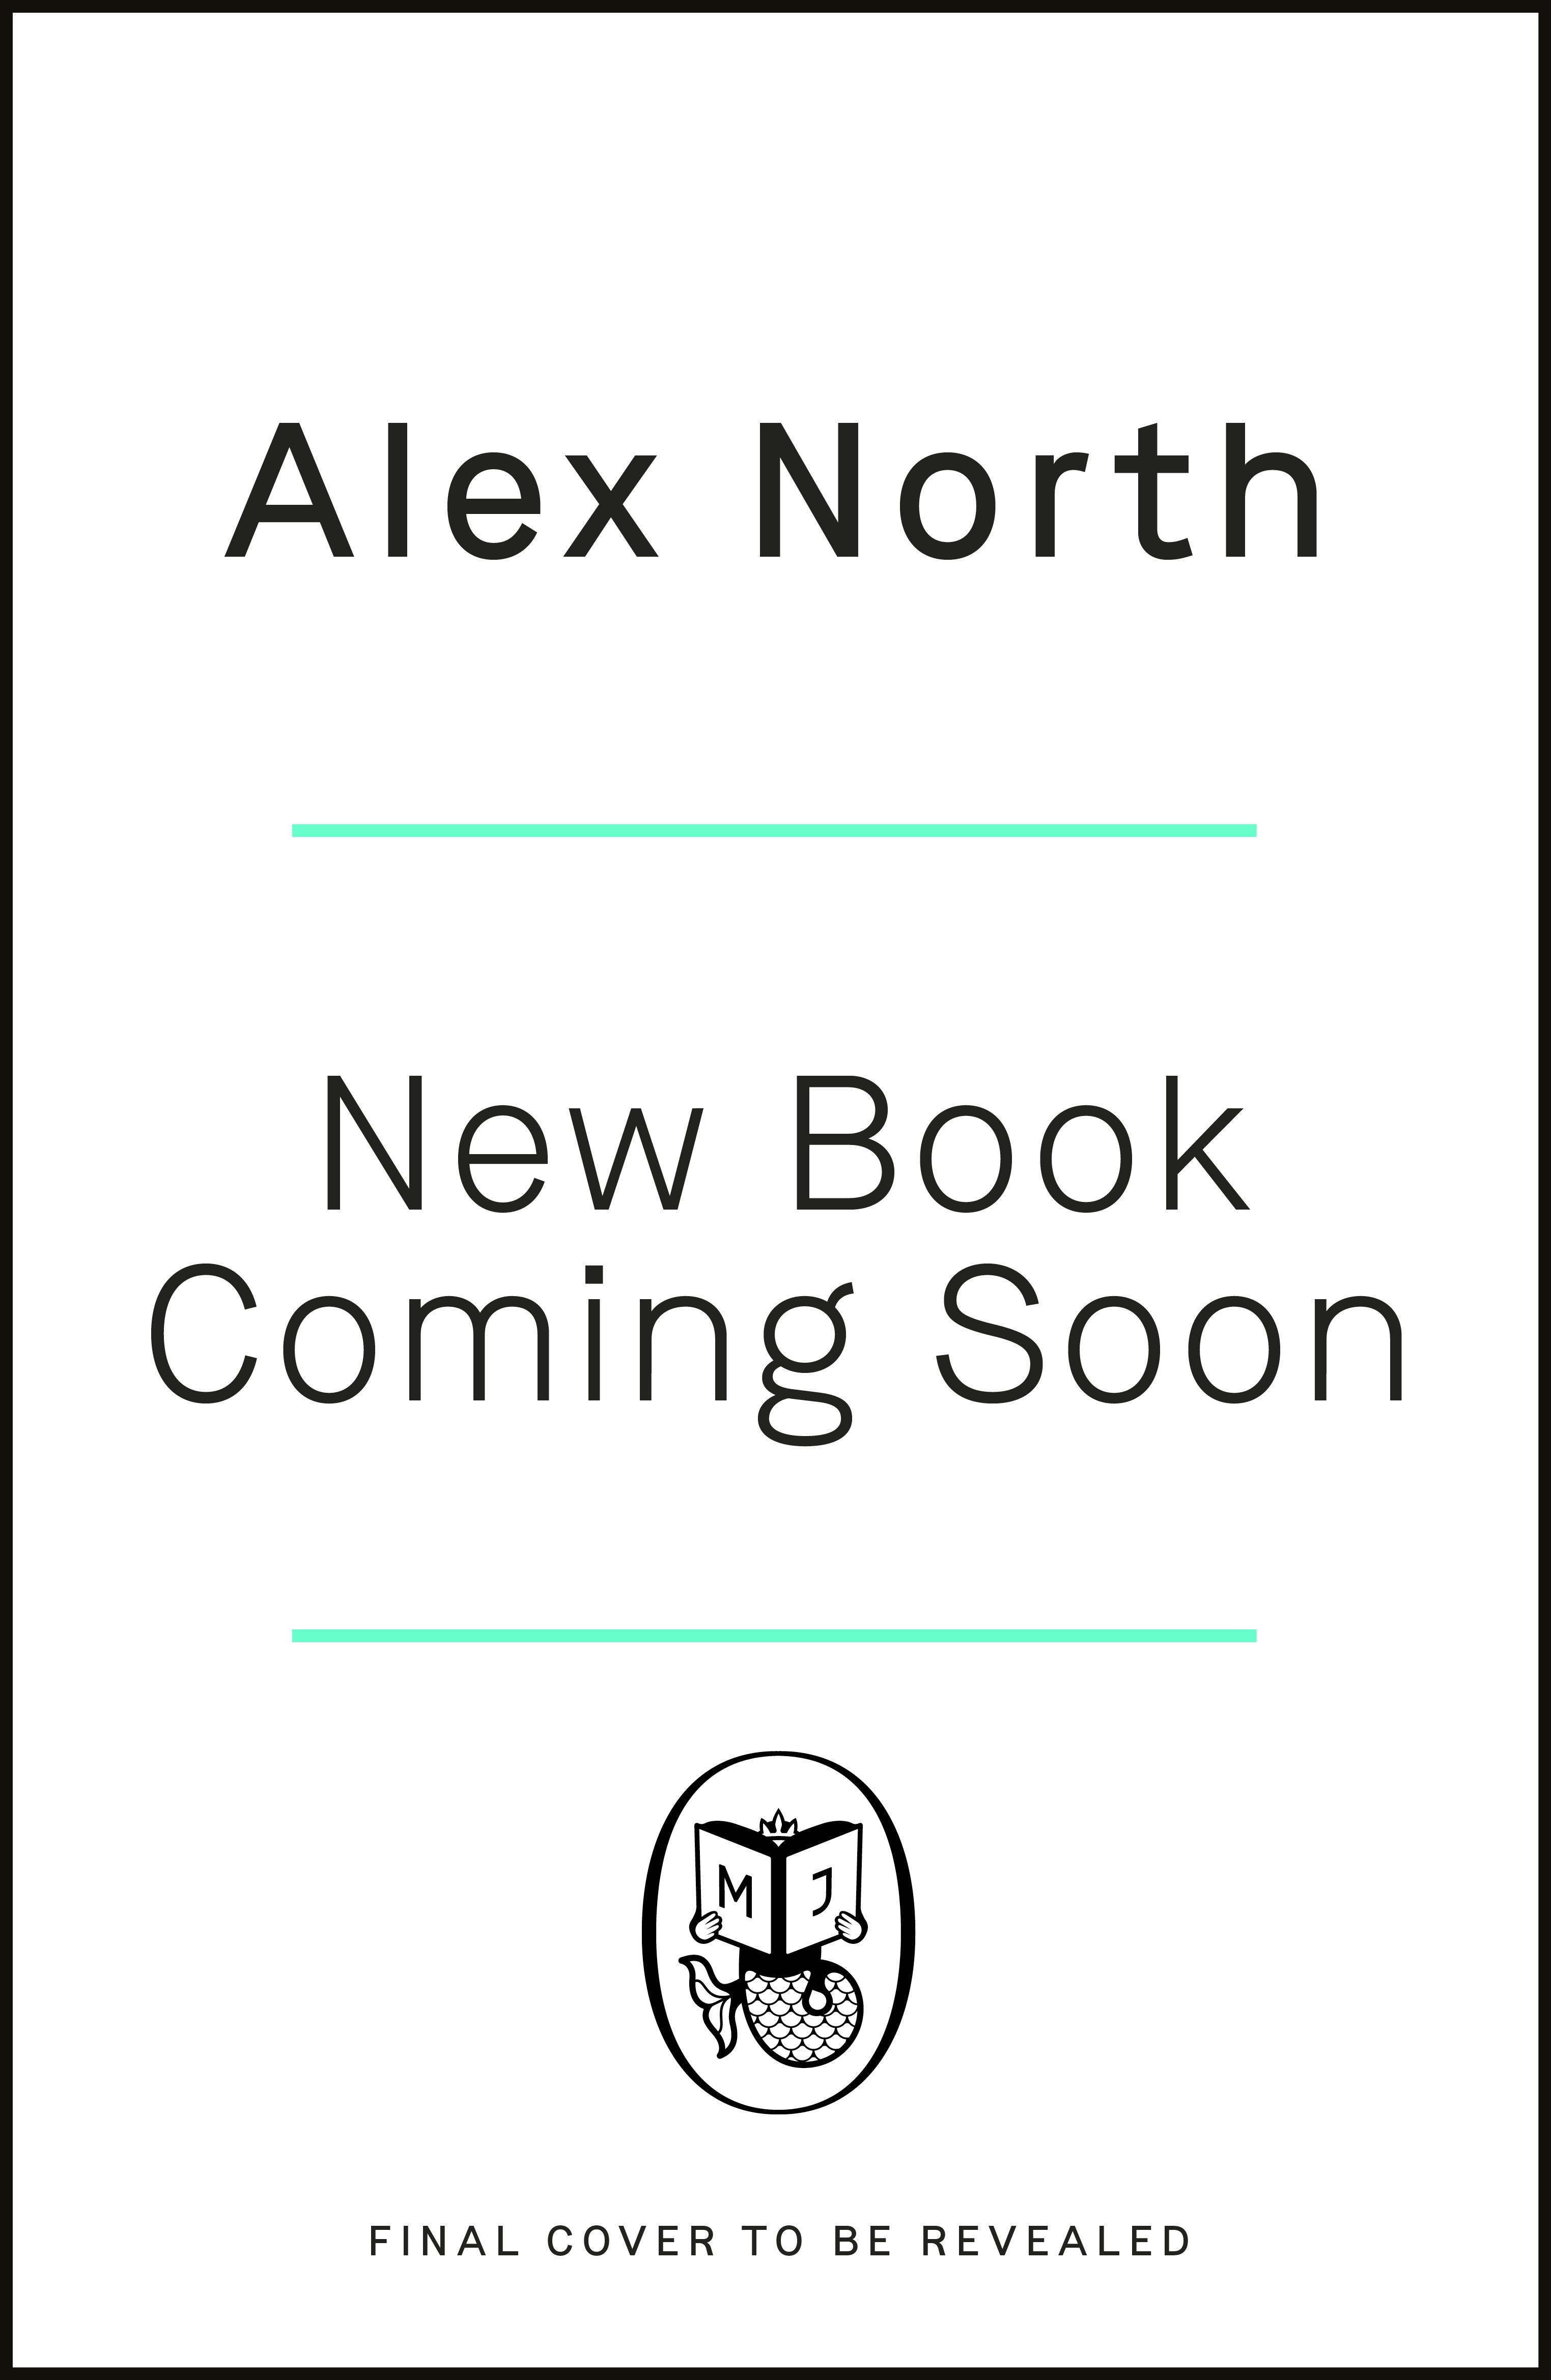 Book “The Half Burnt House” by Alex North — March 16, 2023